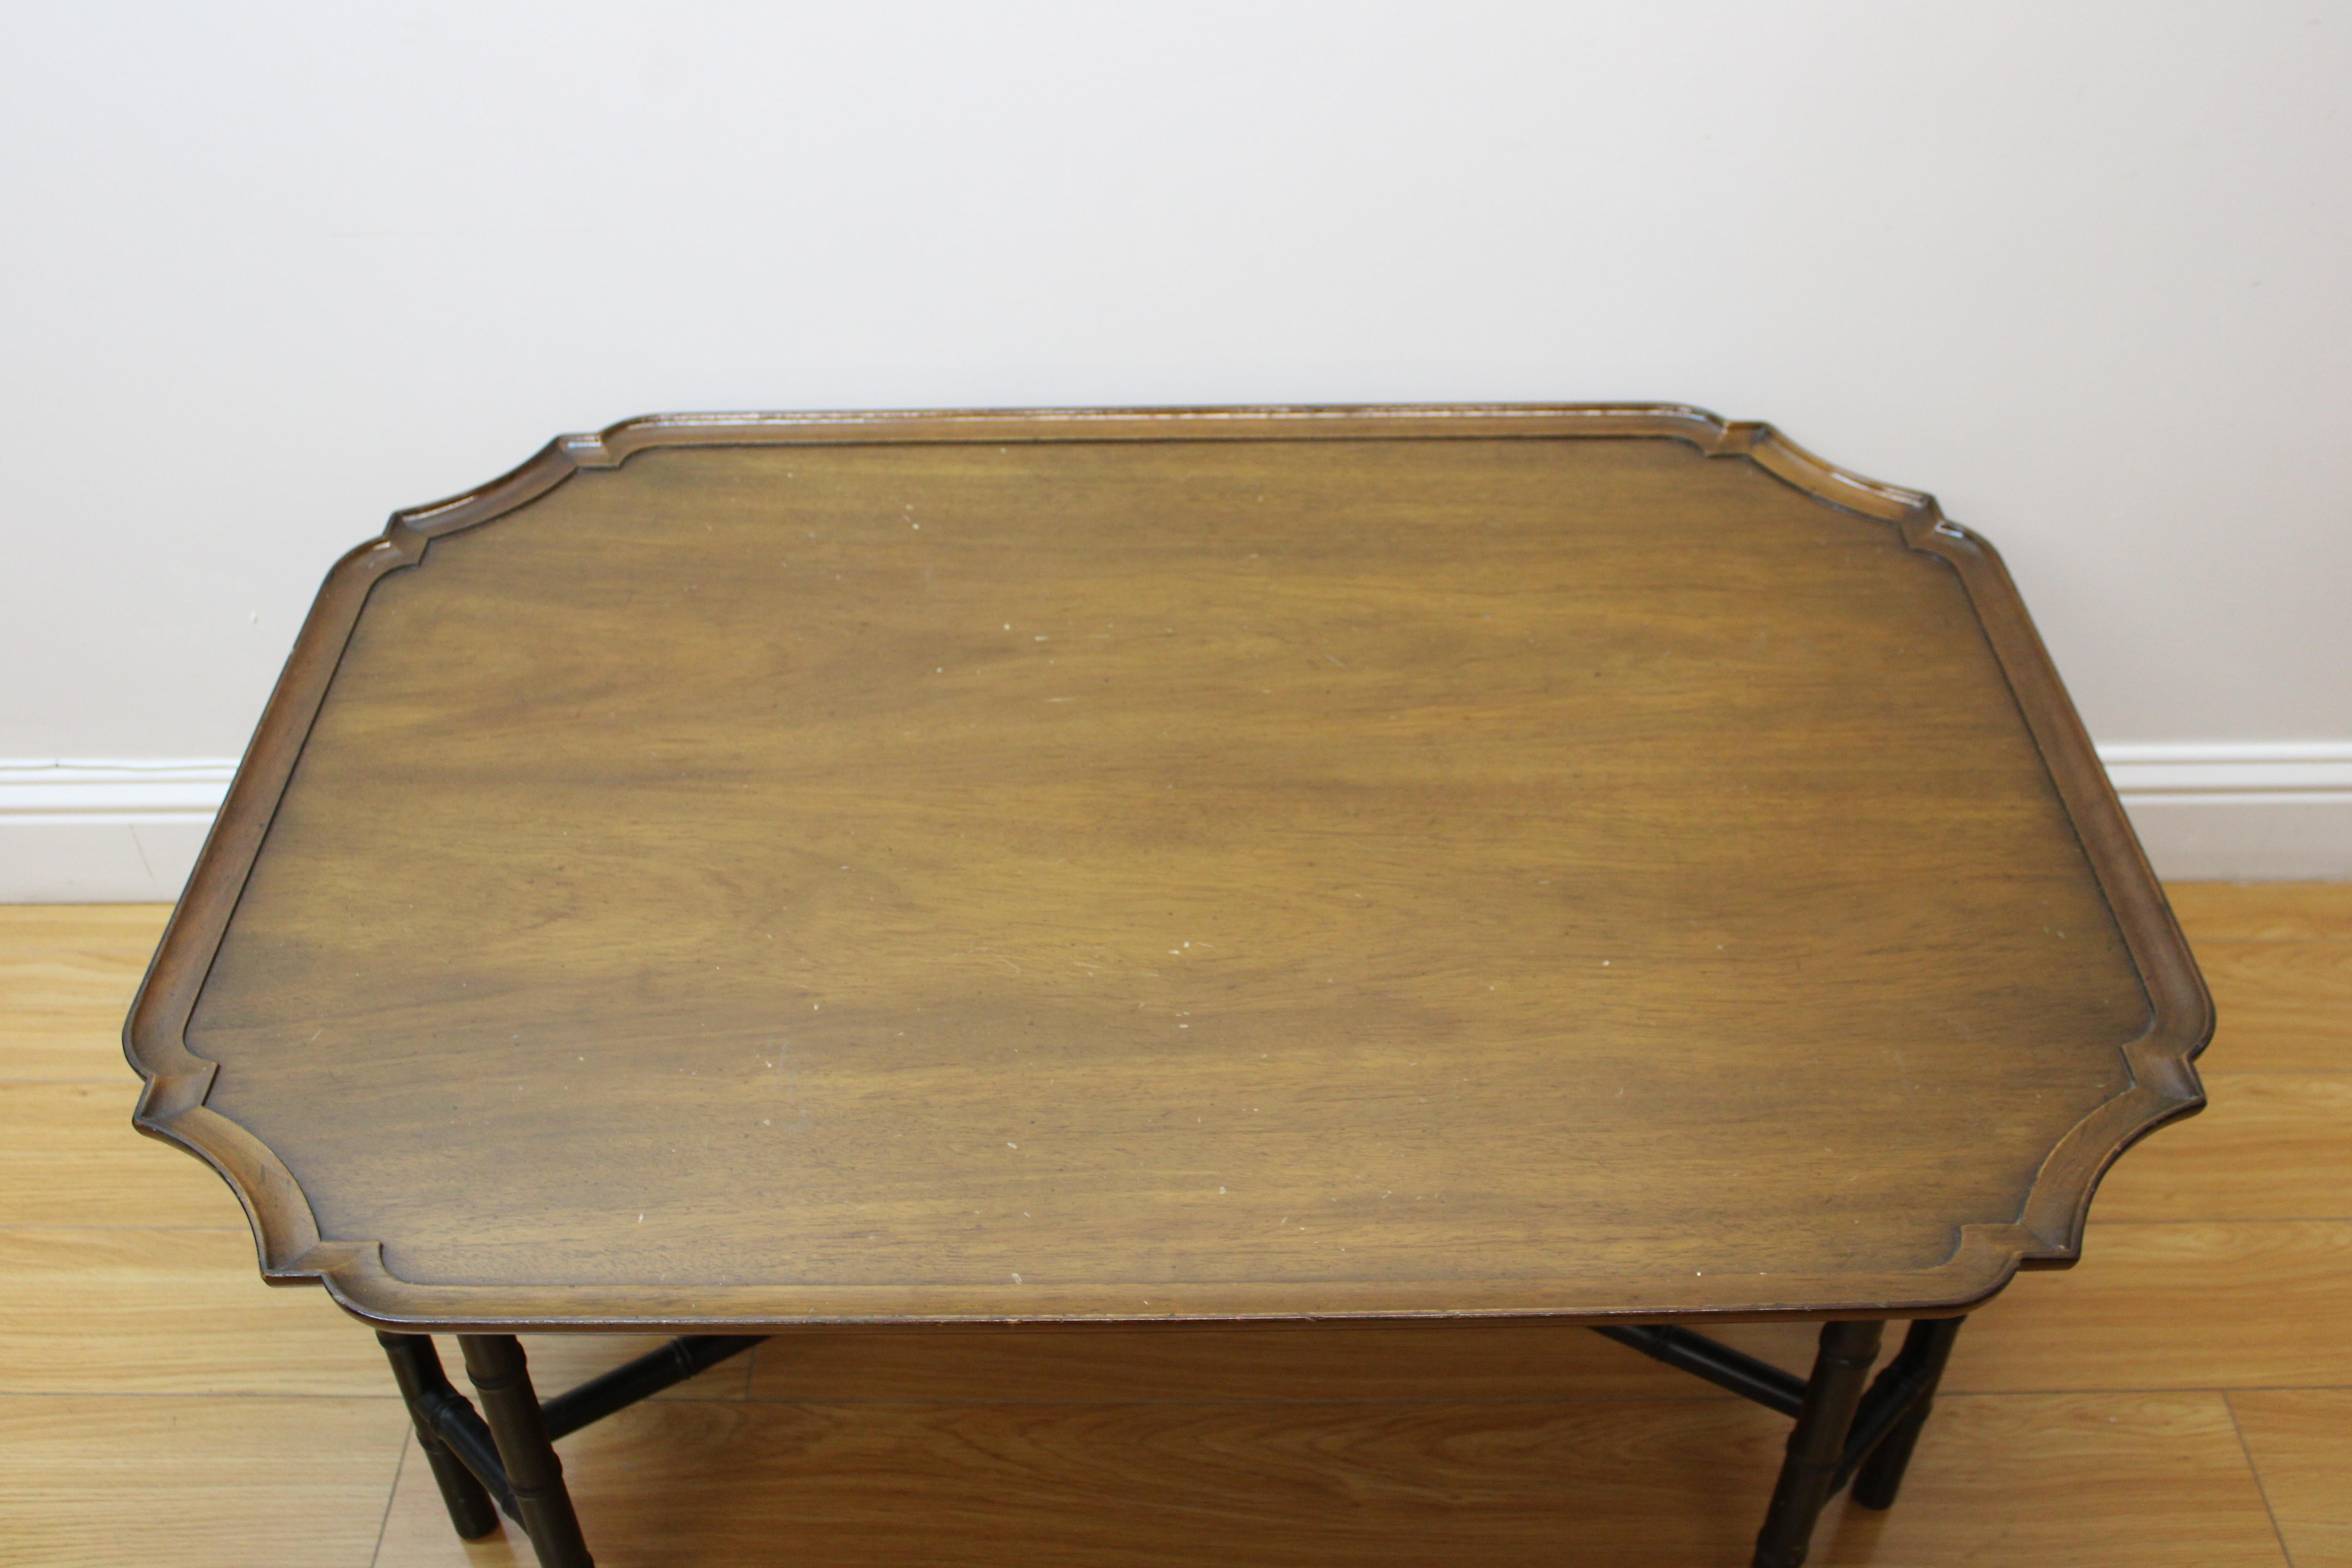 C. 20th century

Asian style octagonal tray table w/ faux bamboo base.